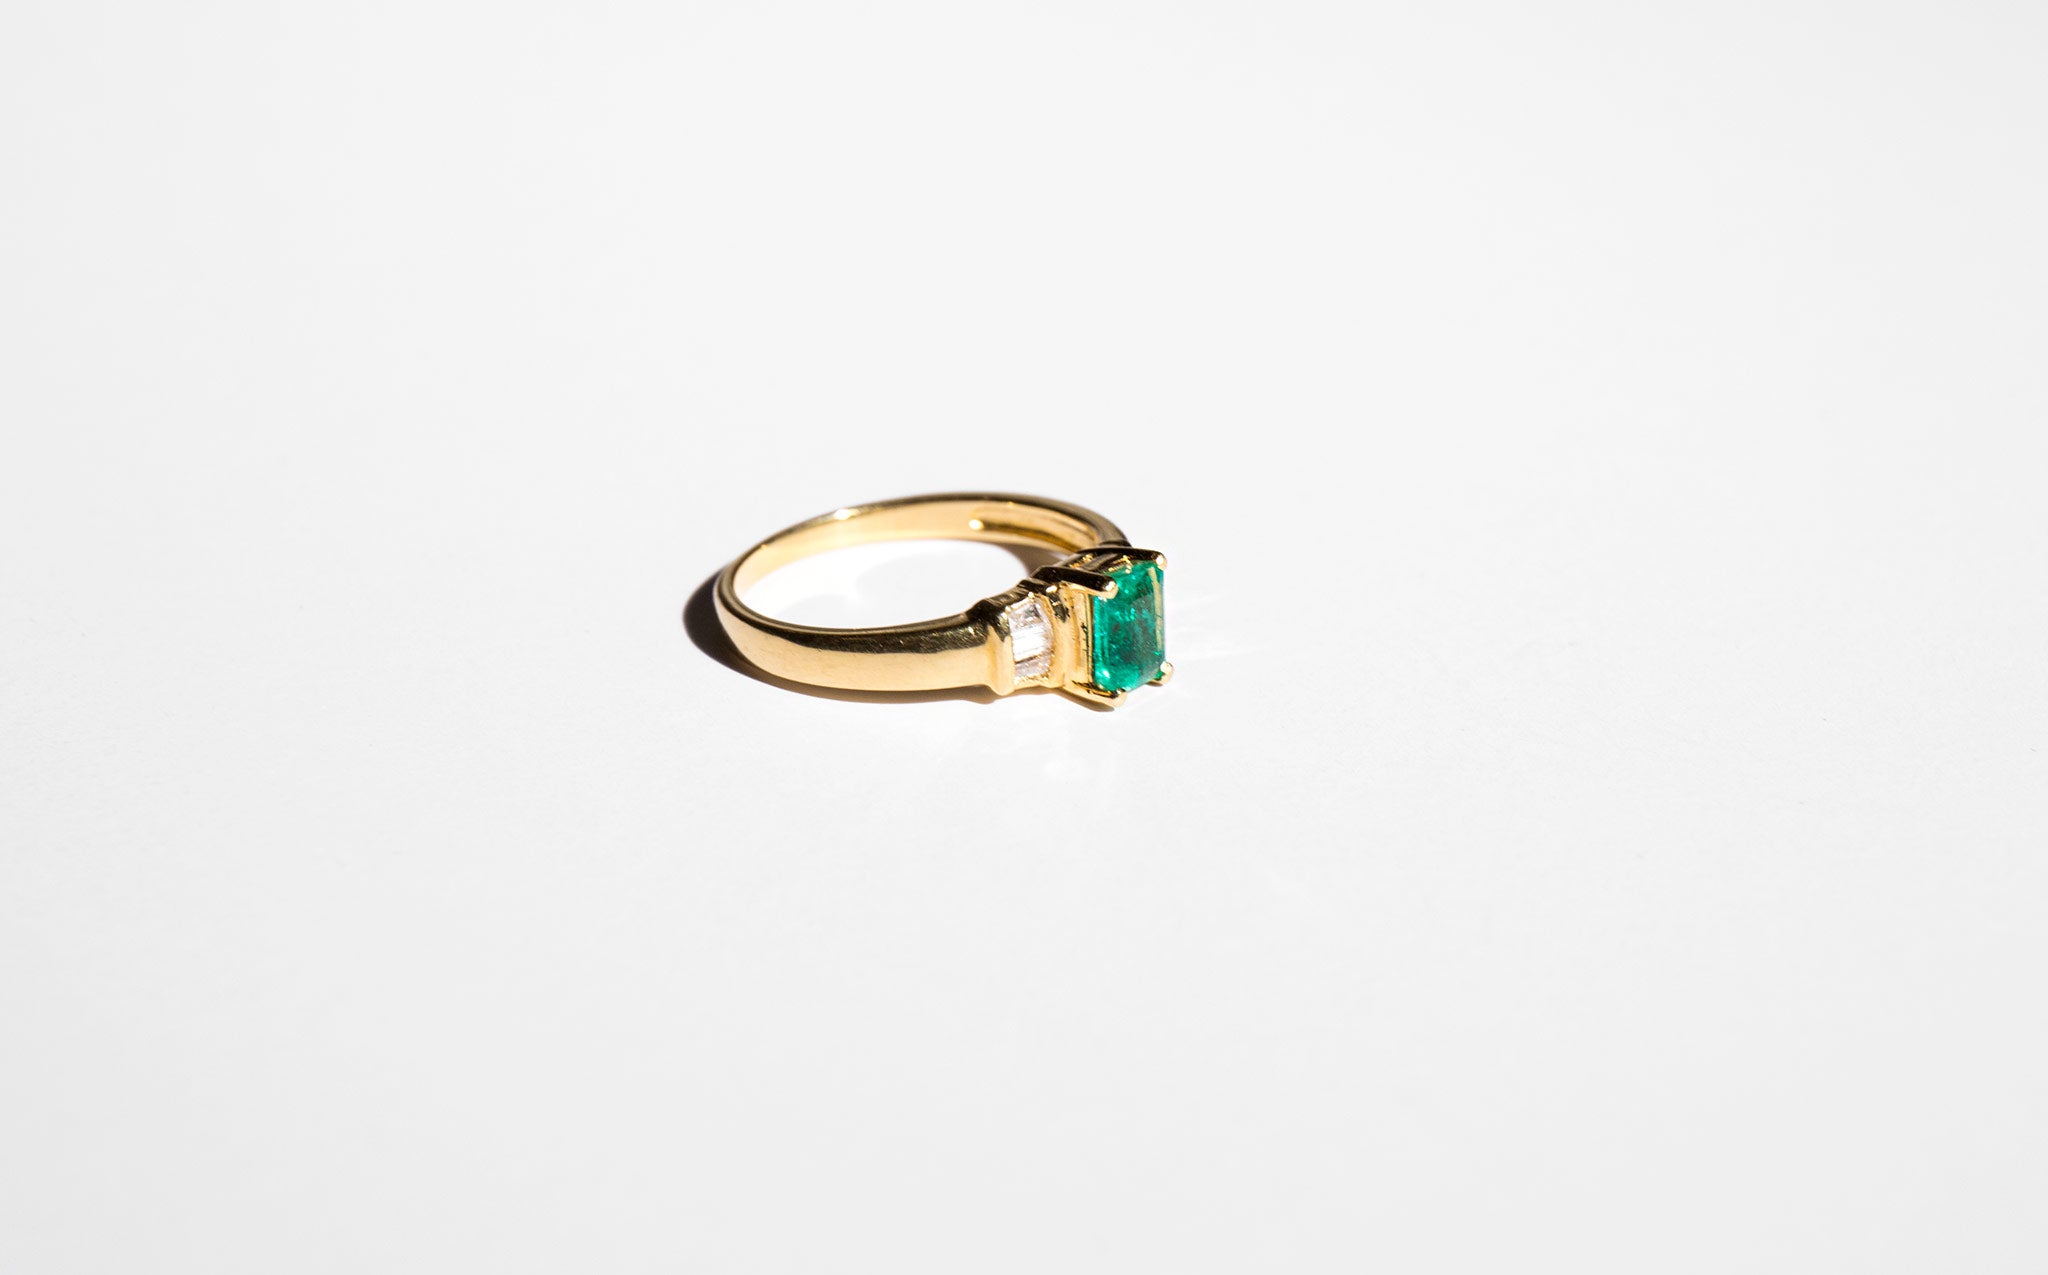 The Emerald City Ring